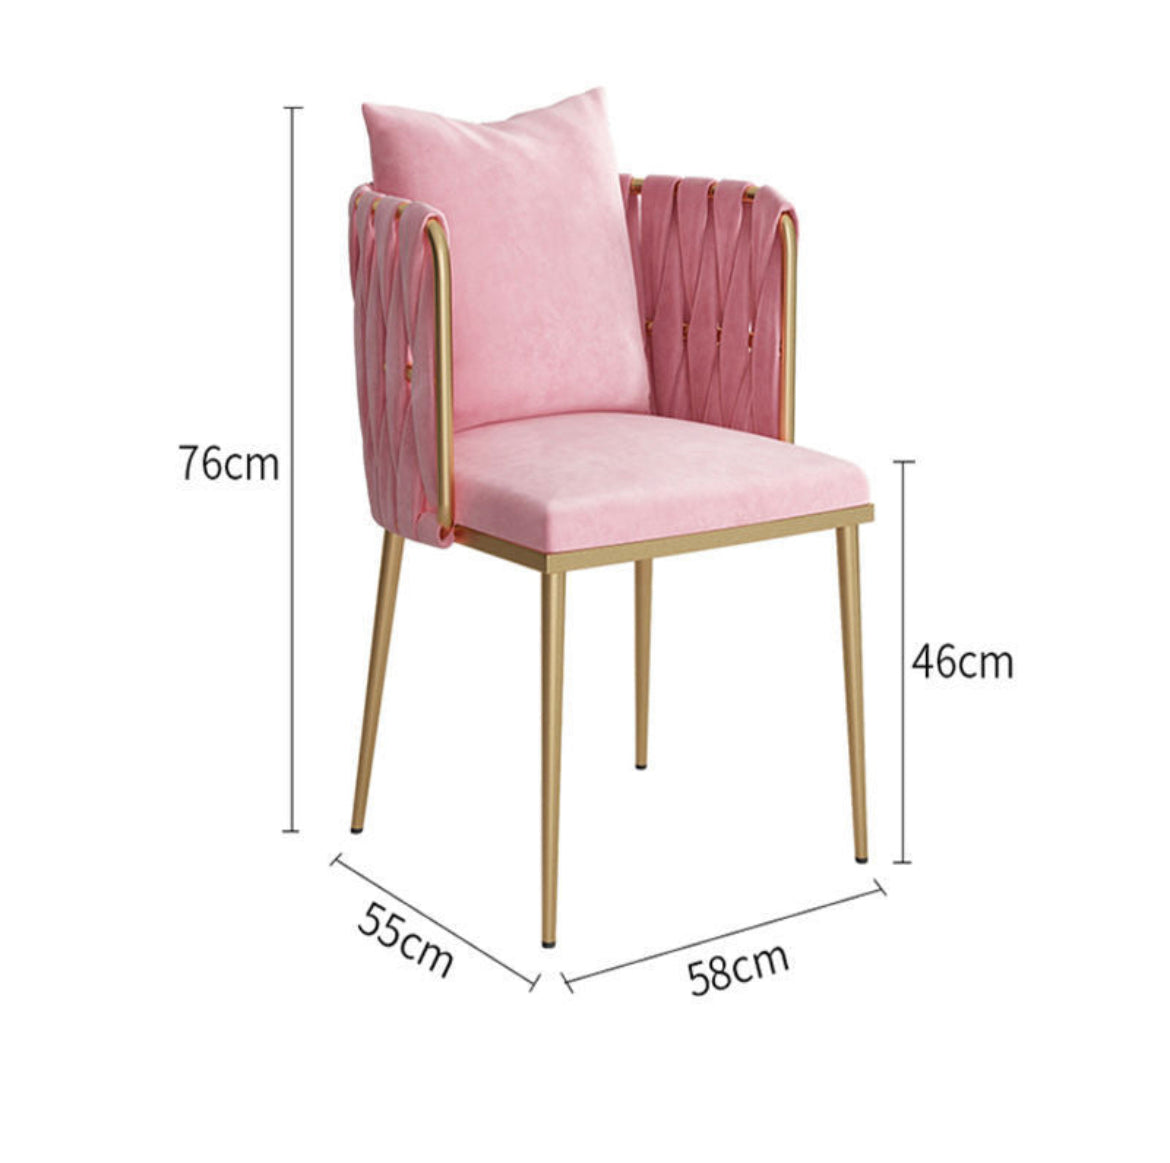 Rolanco Chair Dining Chair